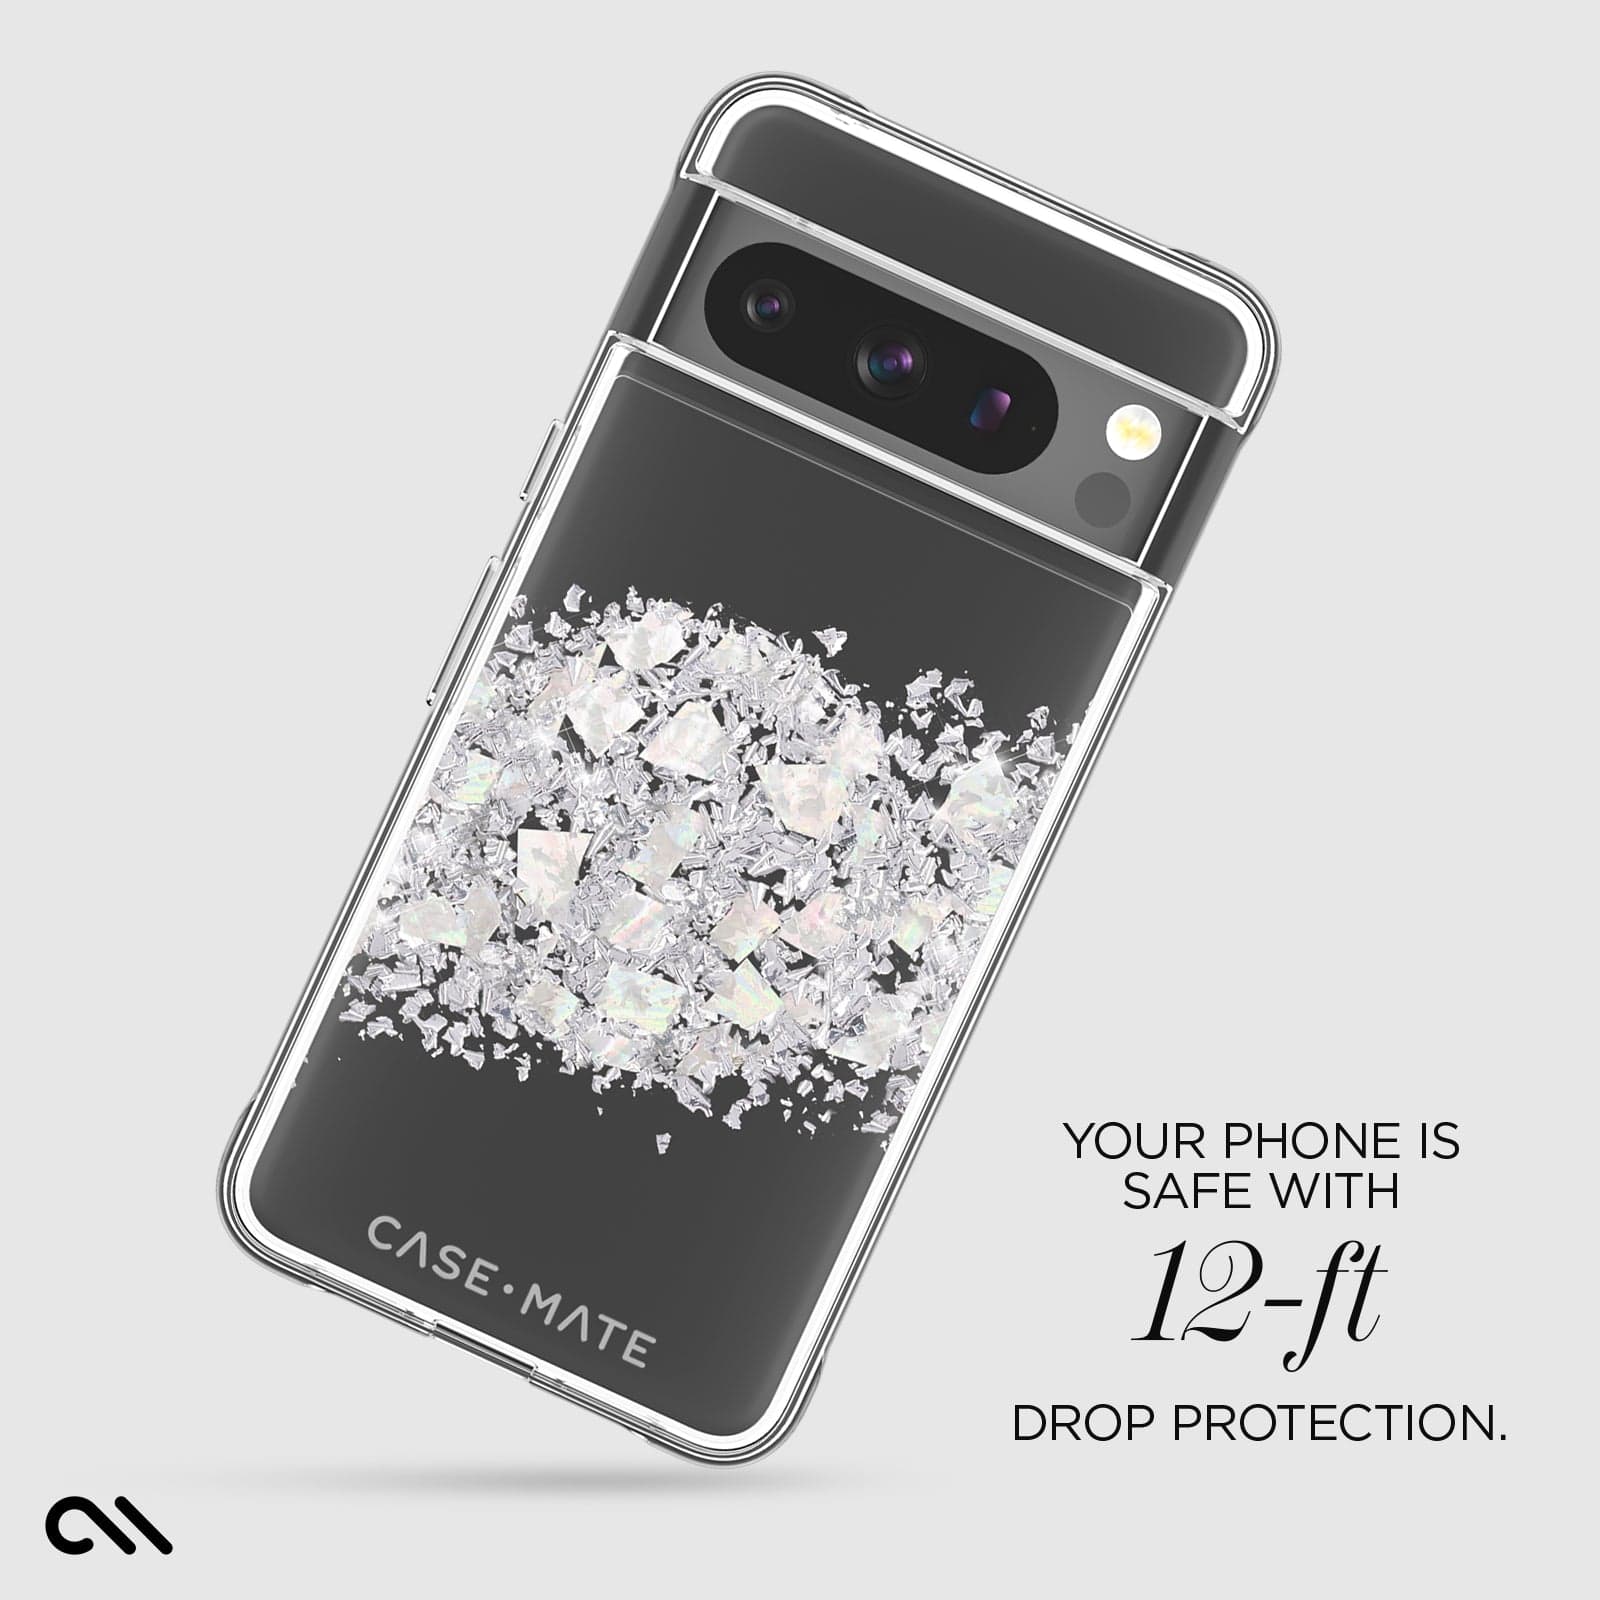 YOUR PHONE IS SAFE WITH 12-FT DROP PROTECTION